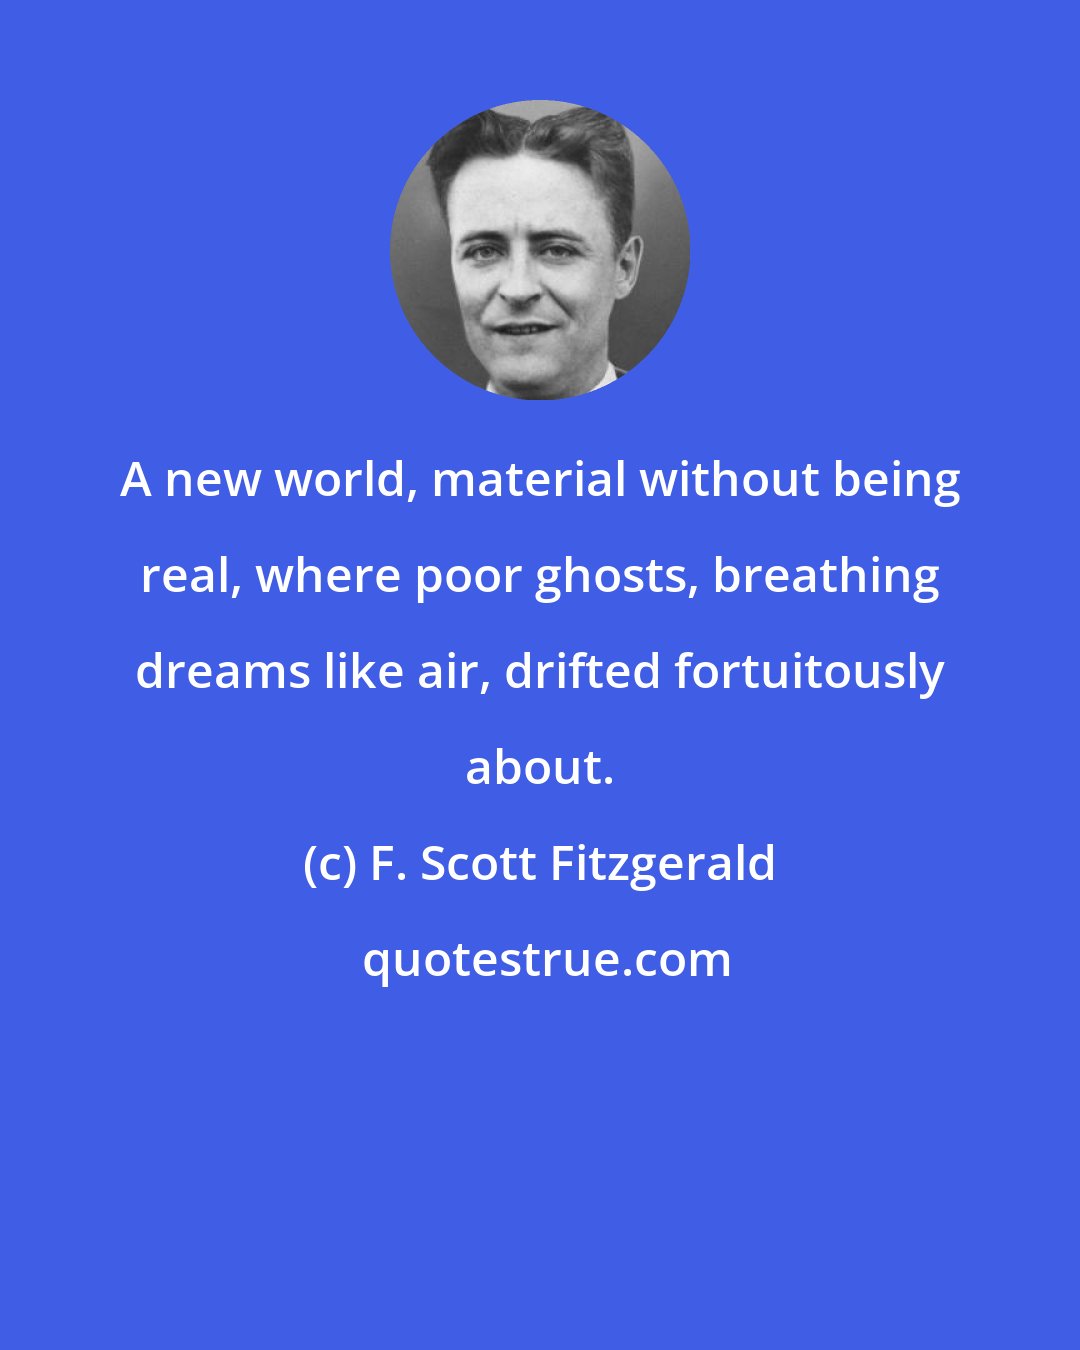 F. Scott Fitzgerald: A new world, material without being real, where poor ghosts, breathing dreams like air, drifted fortuitously about.